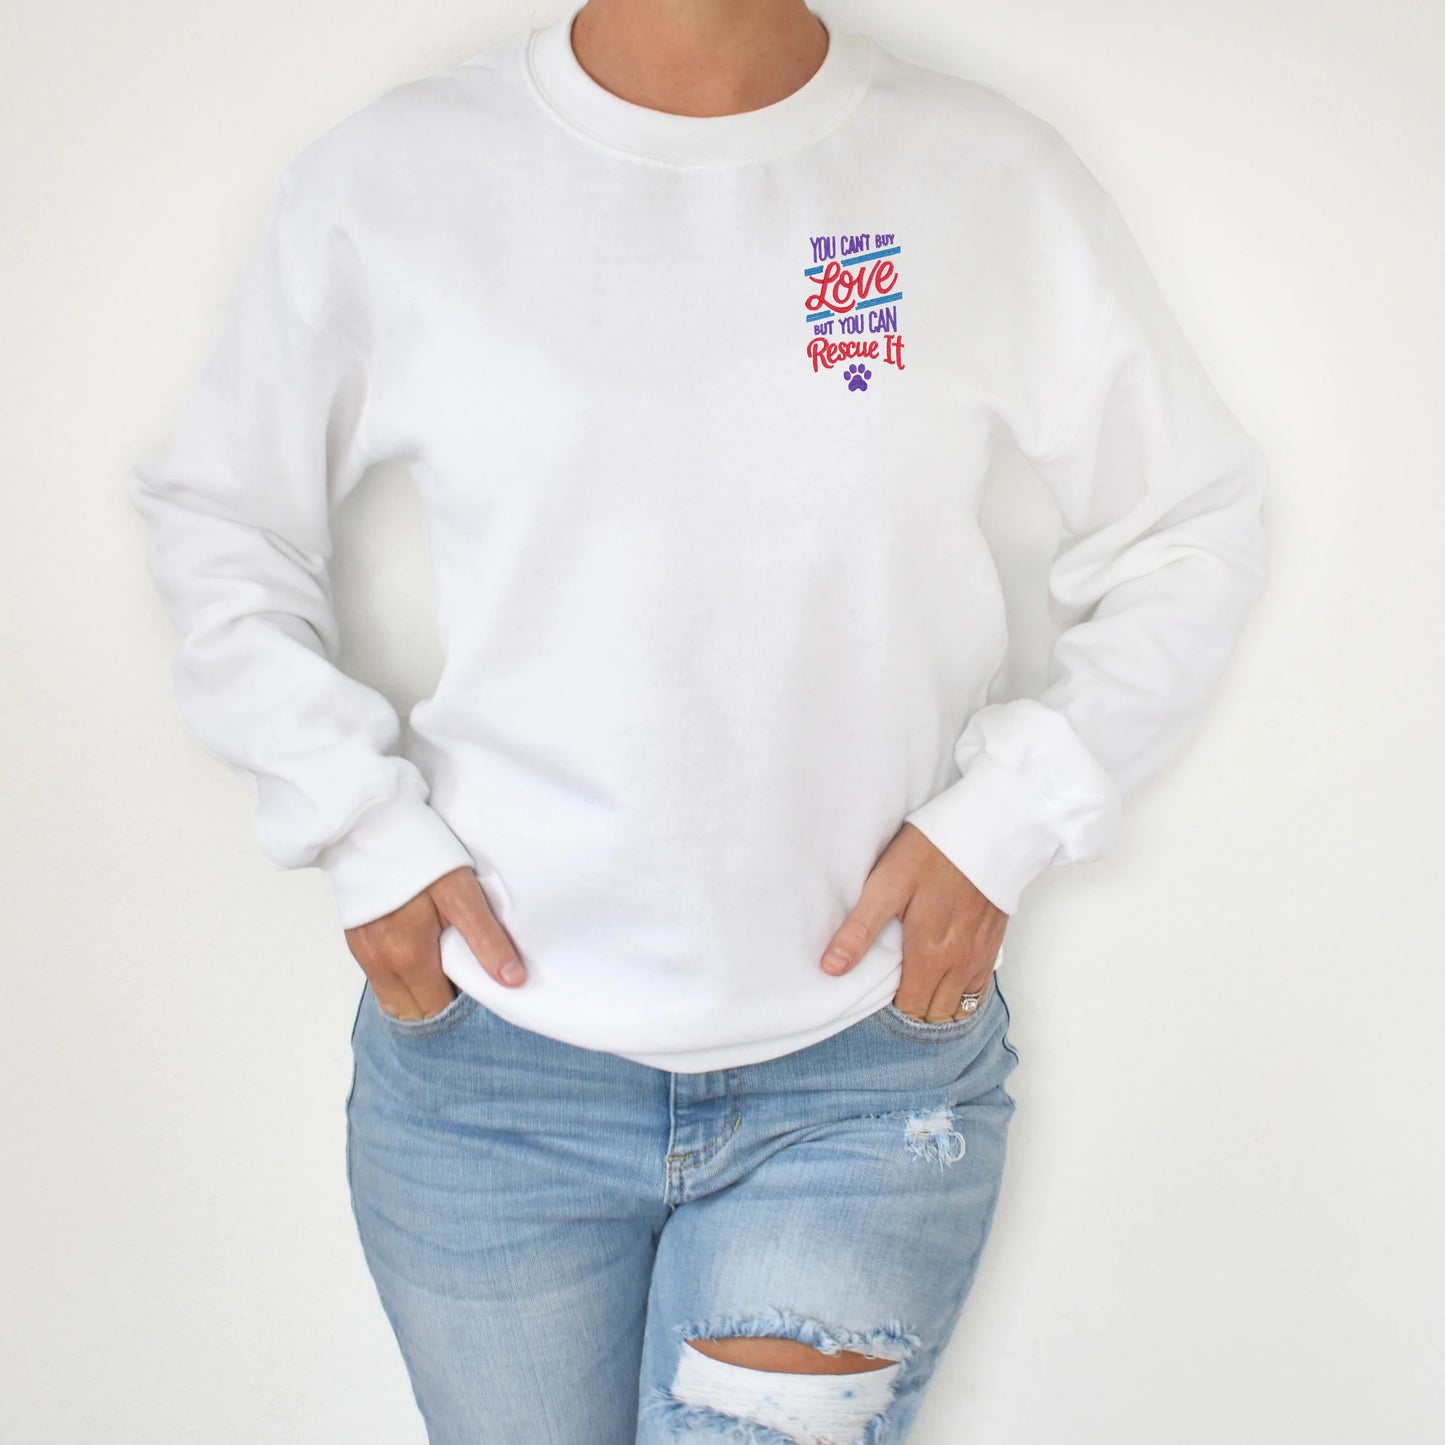 You Can't Buy Love But You Can Rescue It Embroidered Unisex Crewneck Sweatshirt